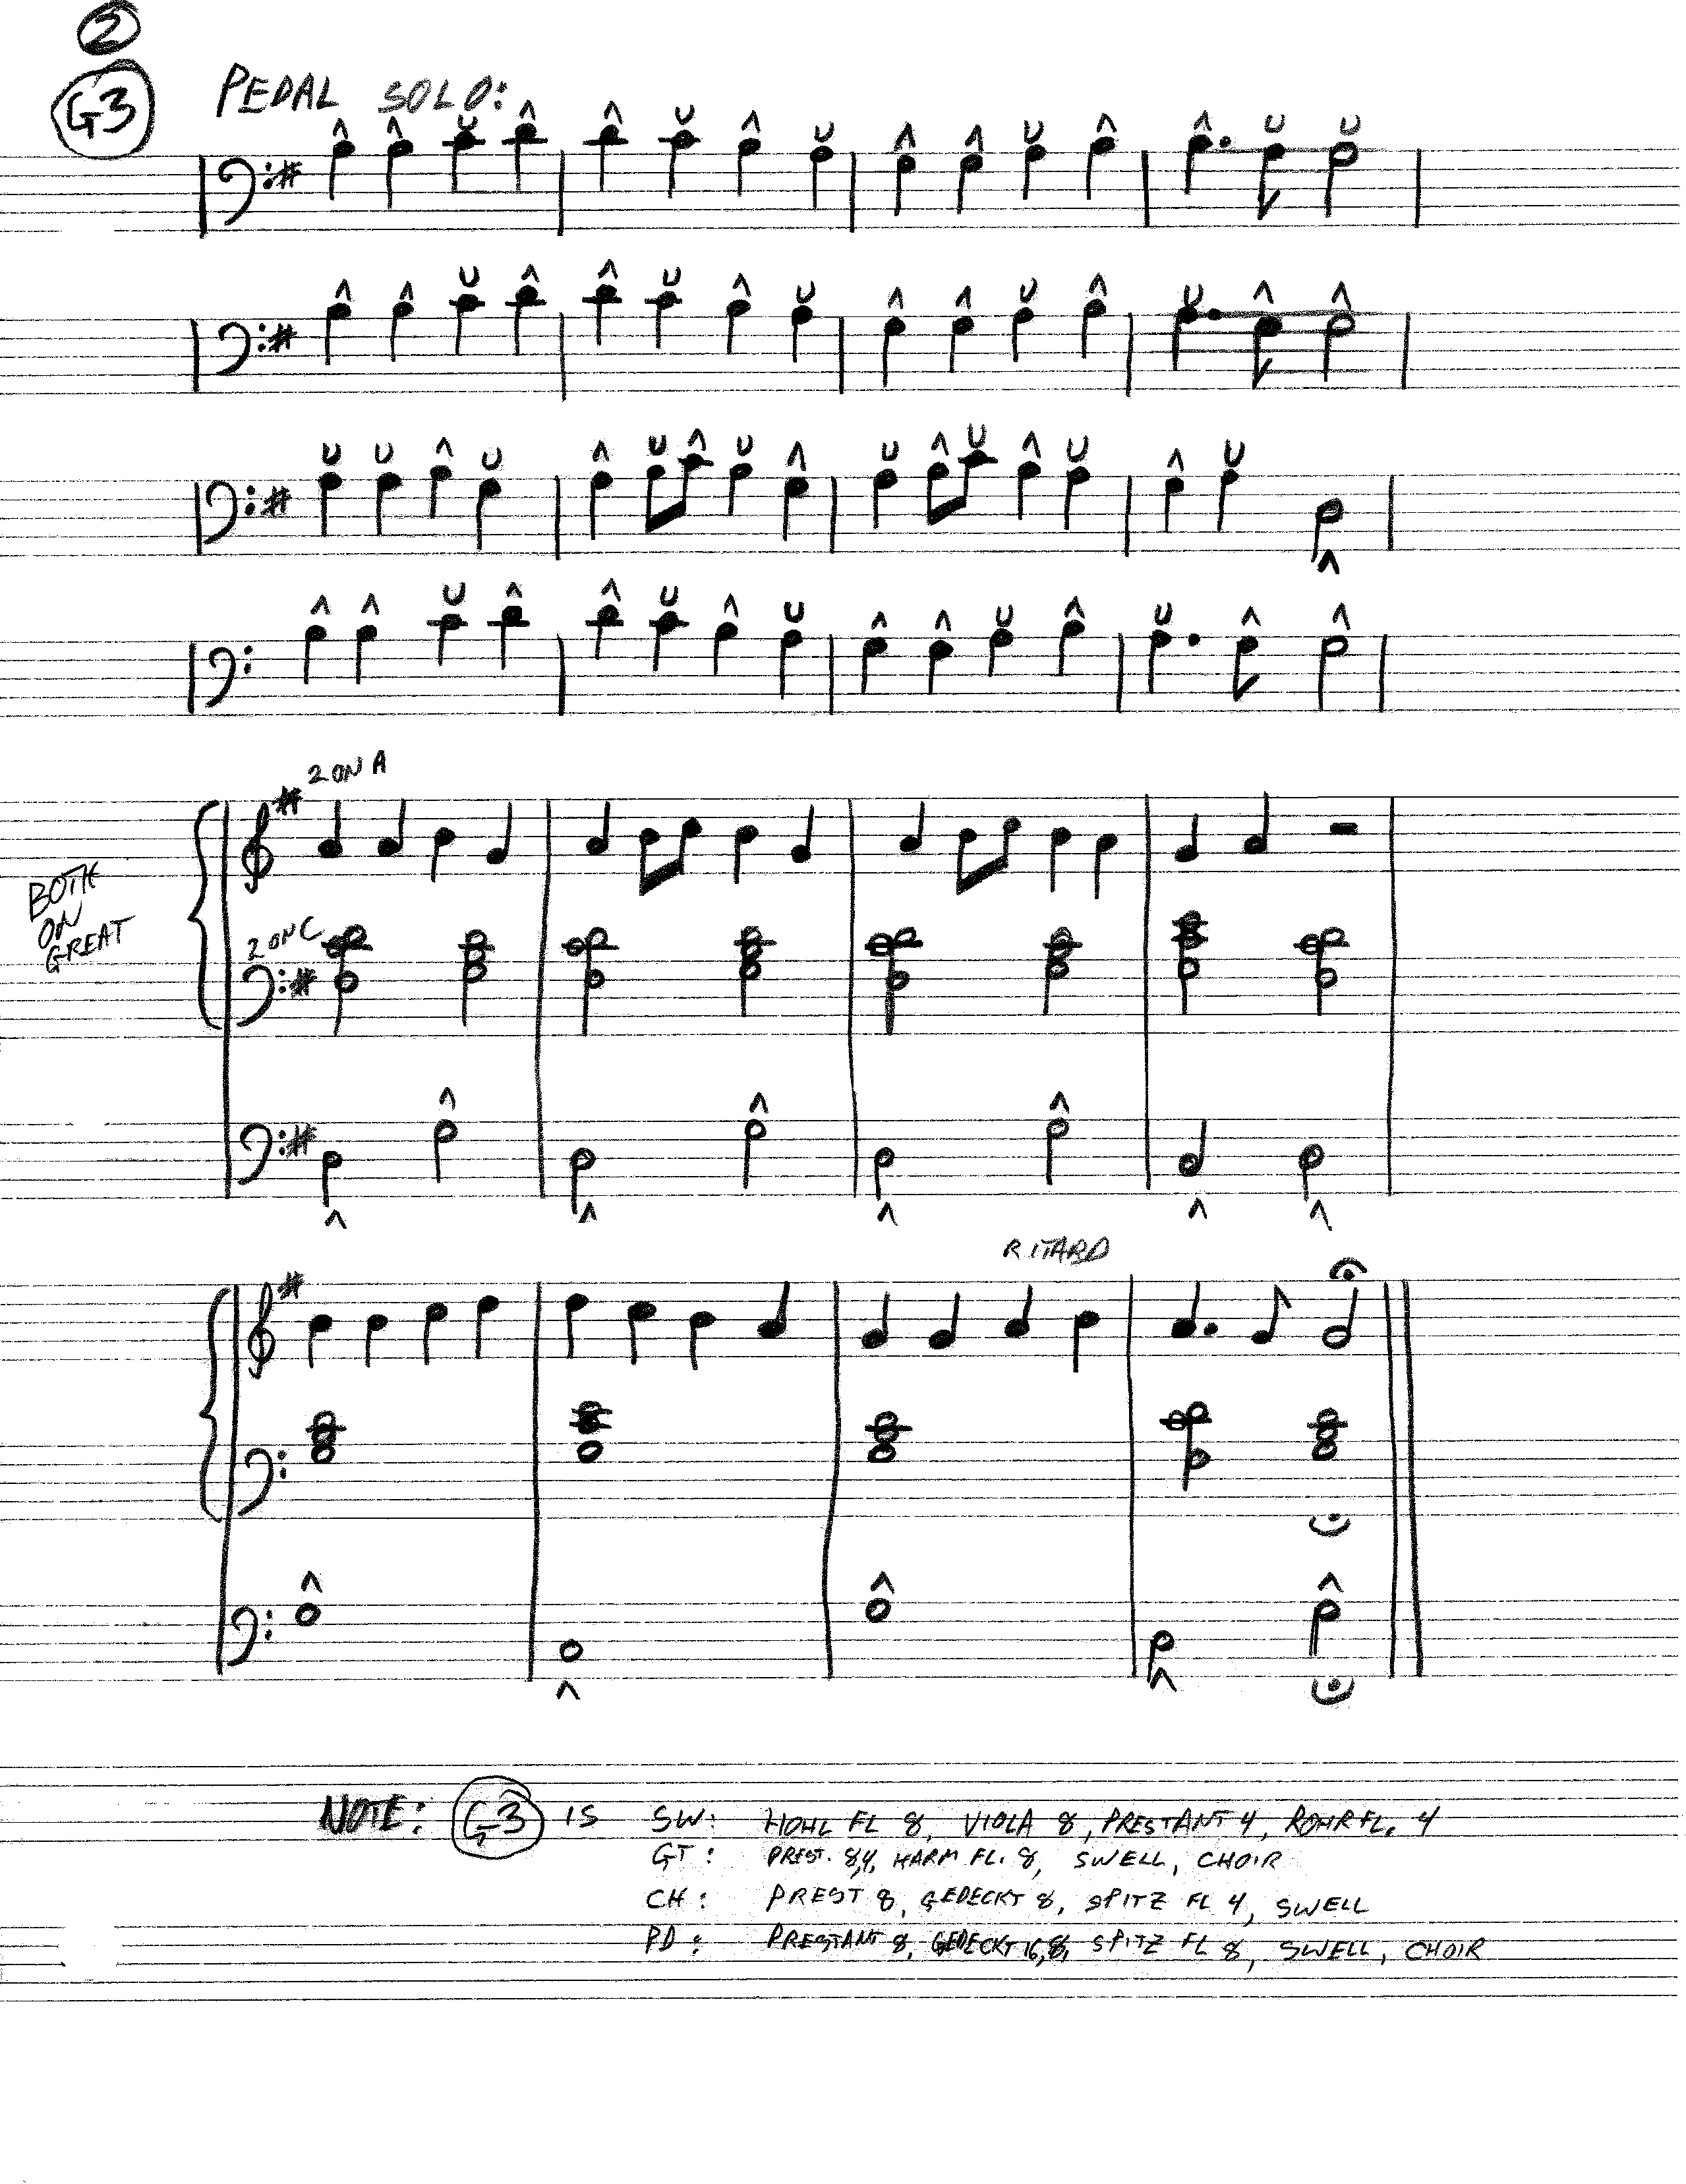 Page 2 of score